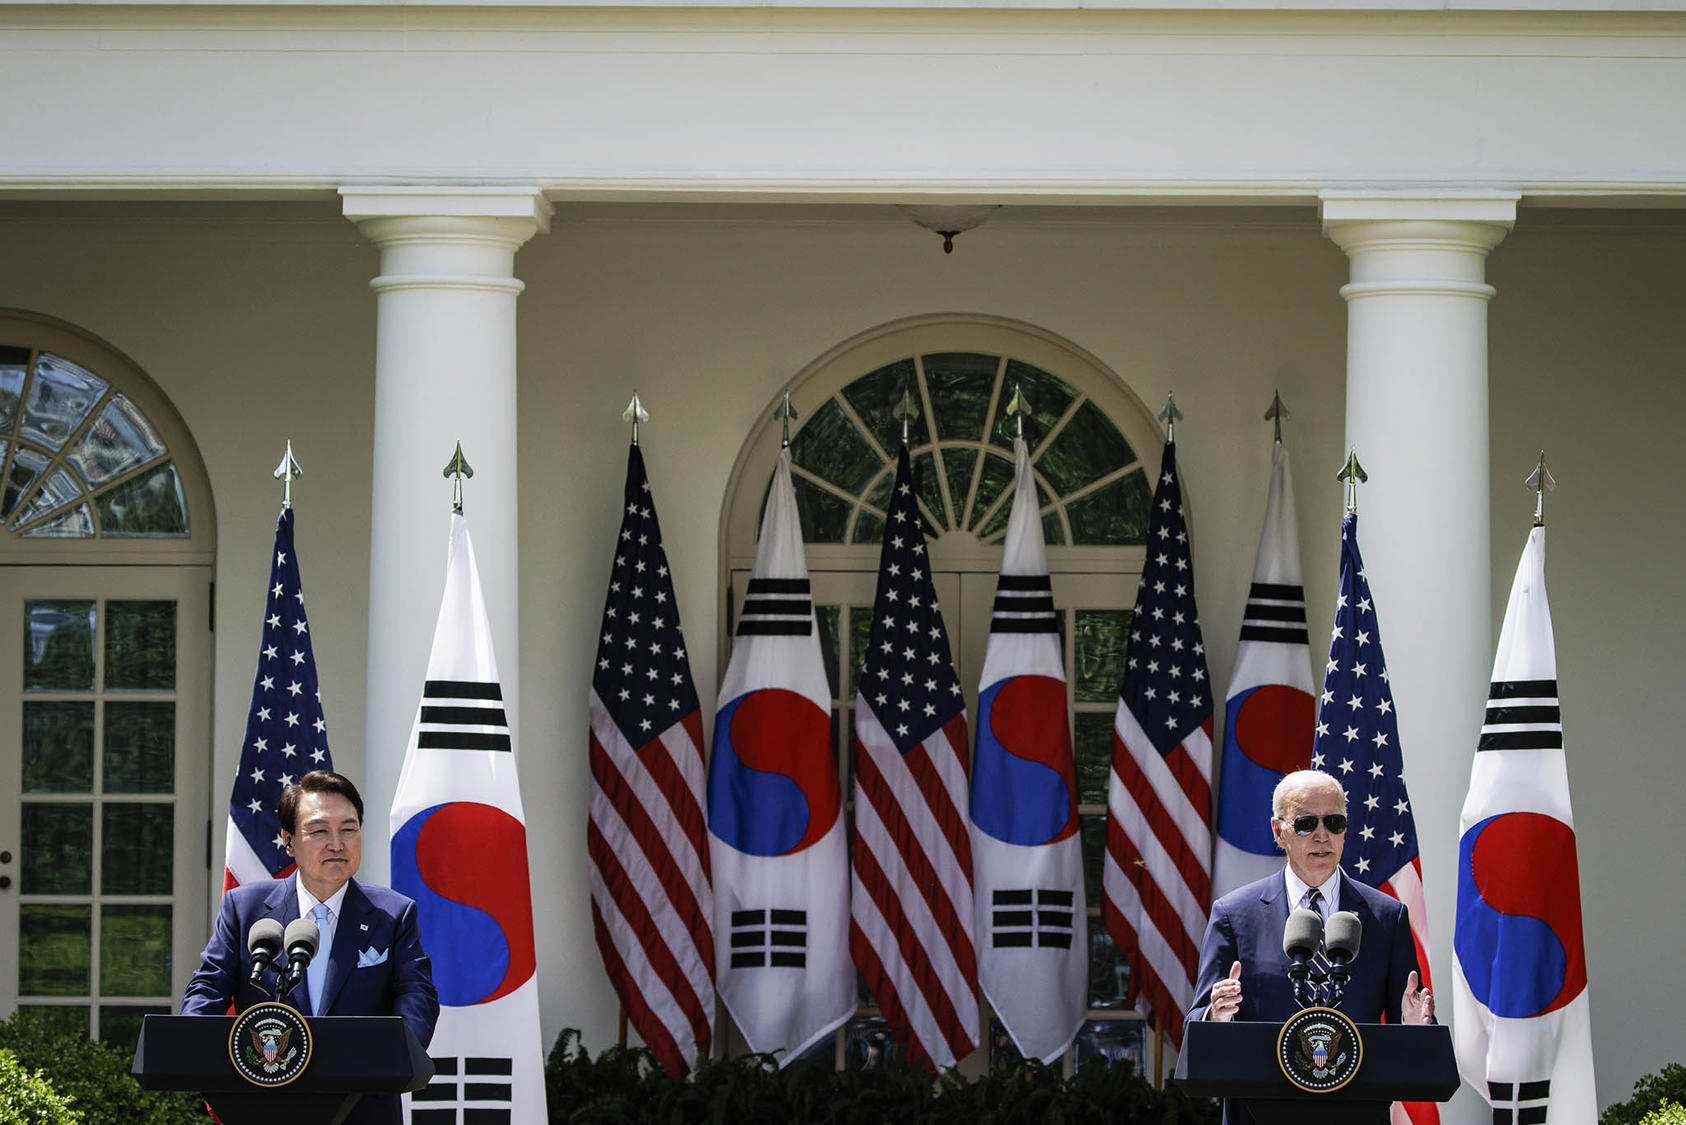 President Joe Biden and South Korean President Yoon Suk Yeol at a joint news conference in the Rose Garden of the White House in Washington, April, 26, 2023. (Samuel Corum/The New York Times)